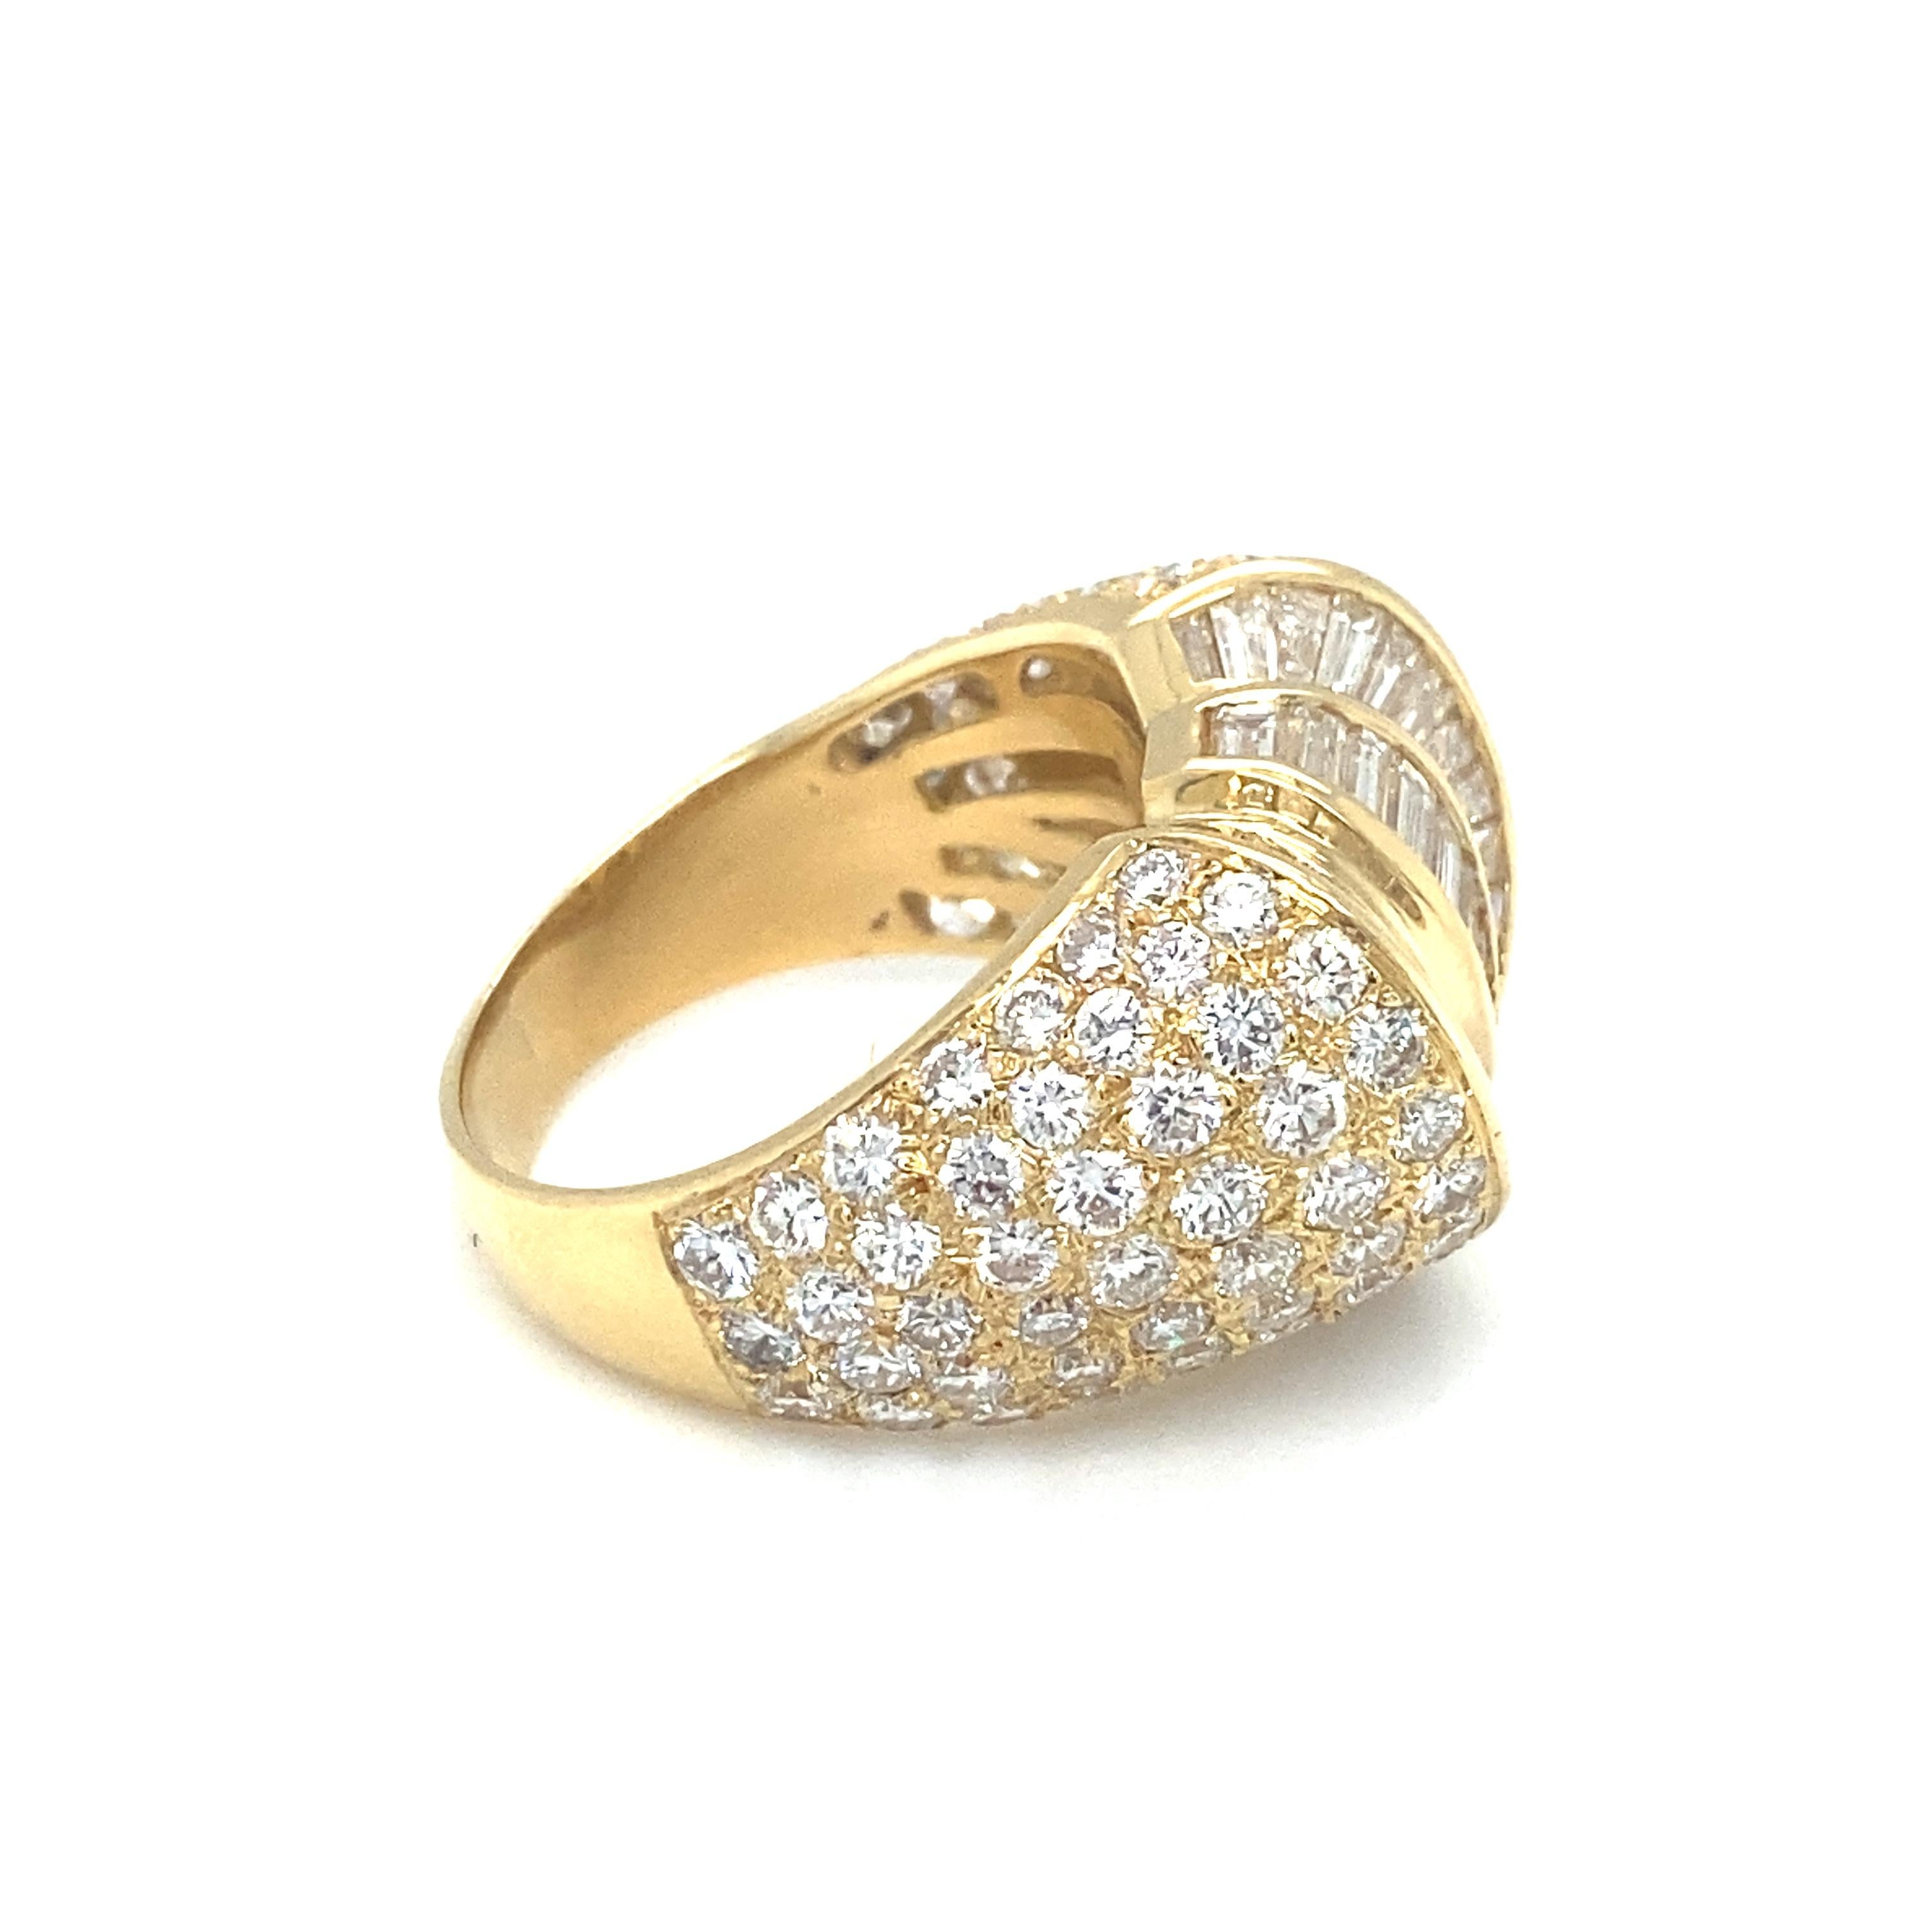 Circa 1980s 7.0 Ctw Diamond Statement Ring in 18K Gold For Sale 1